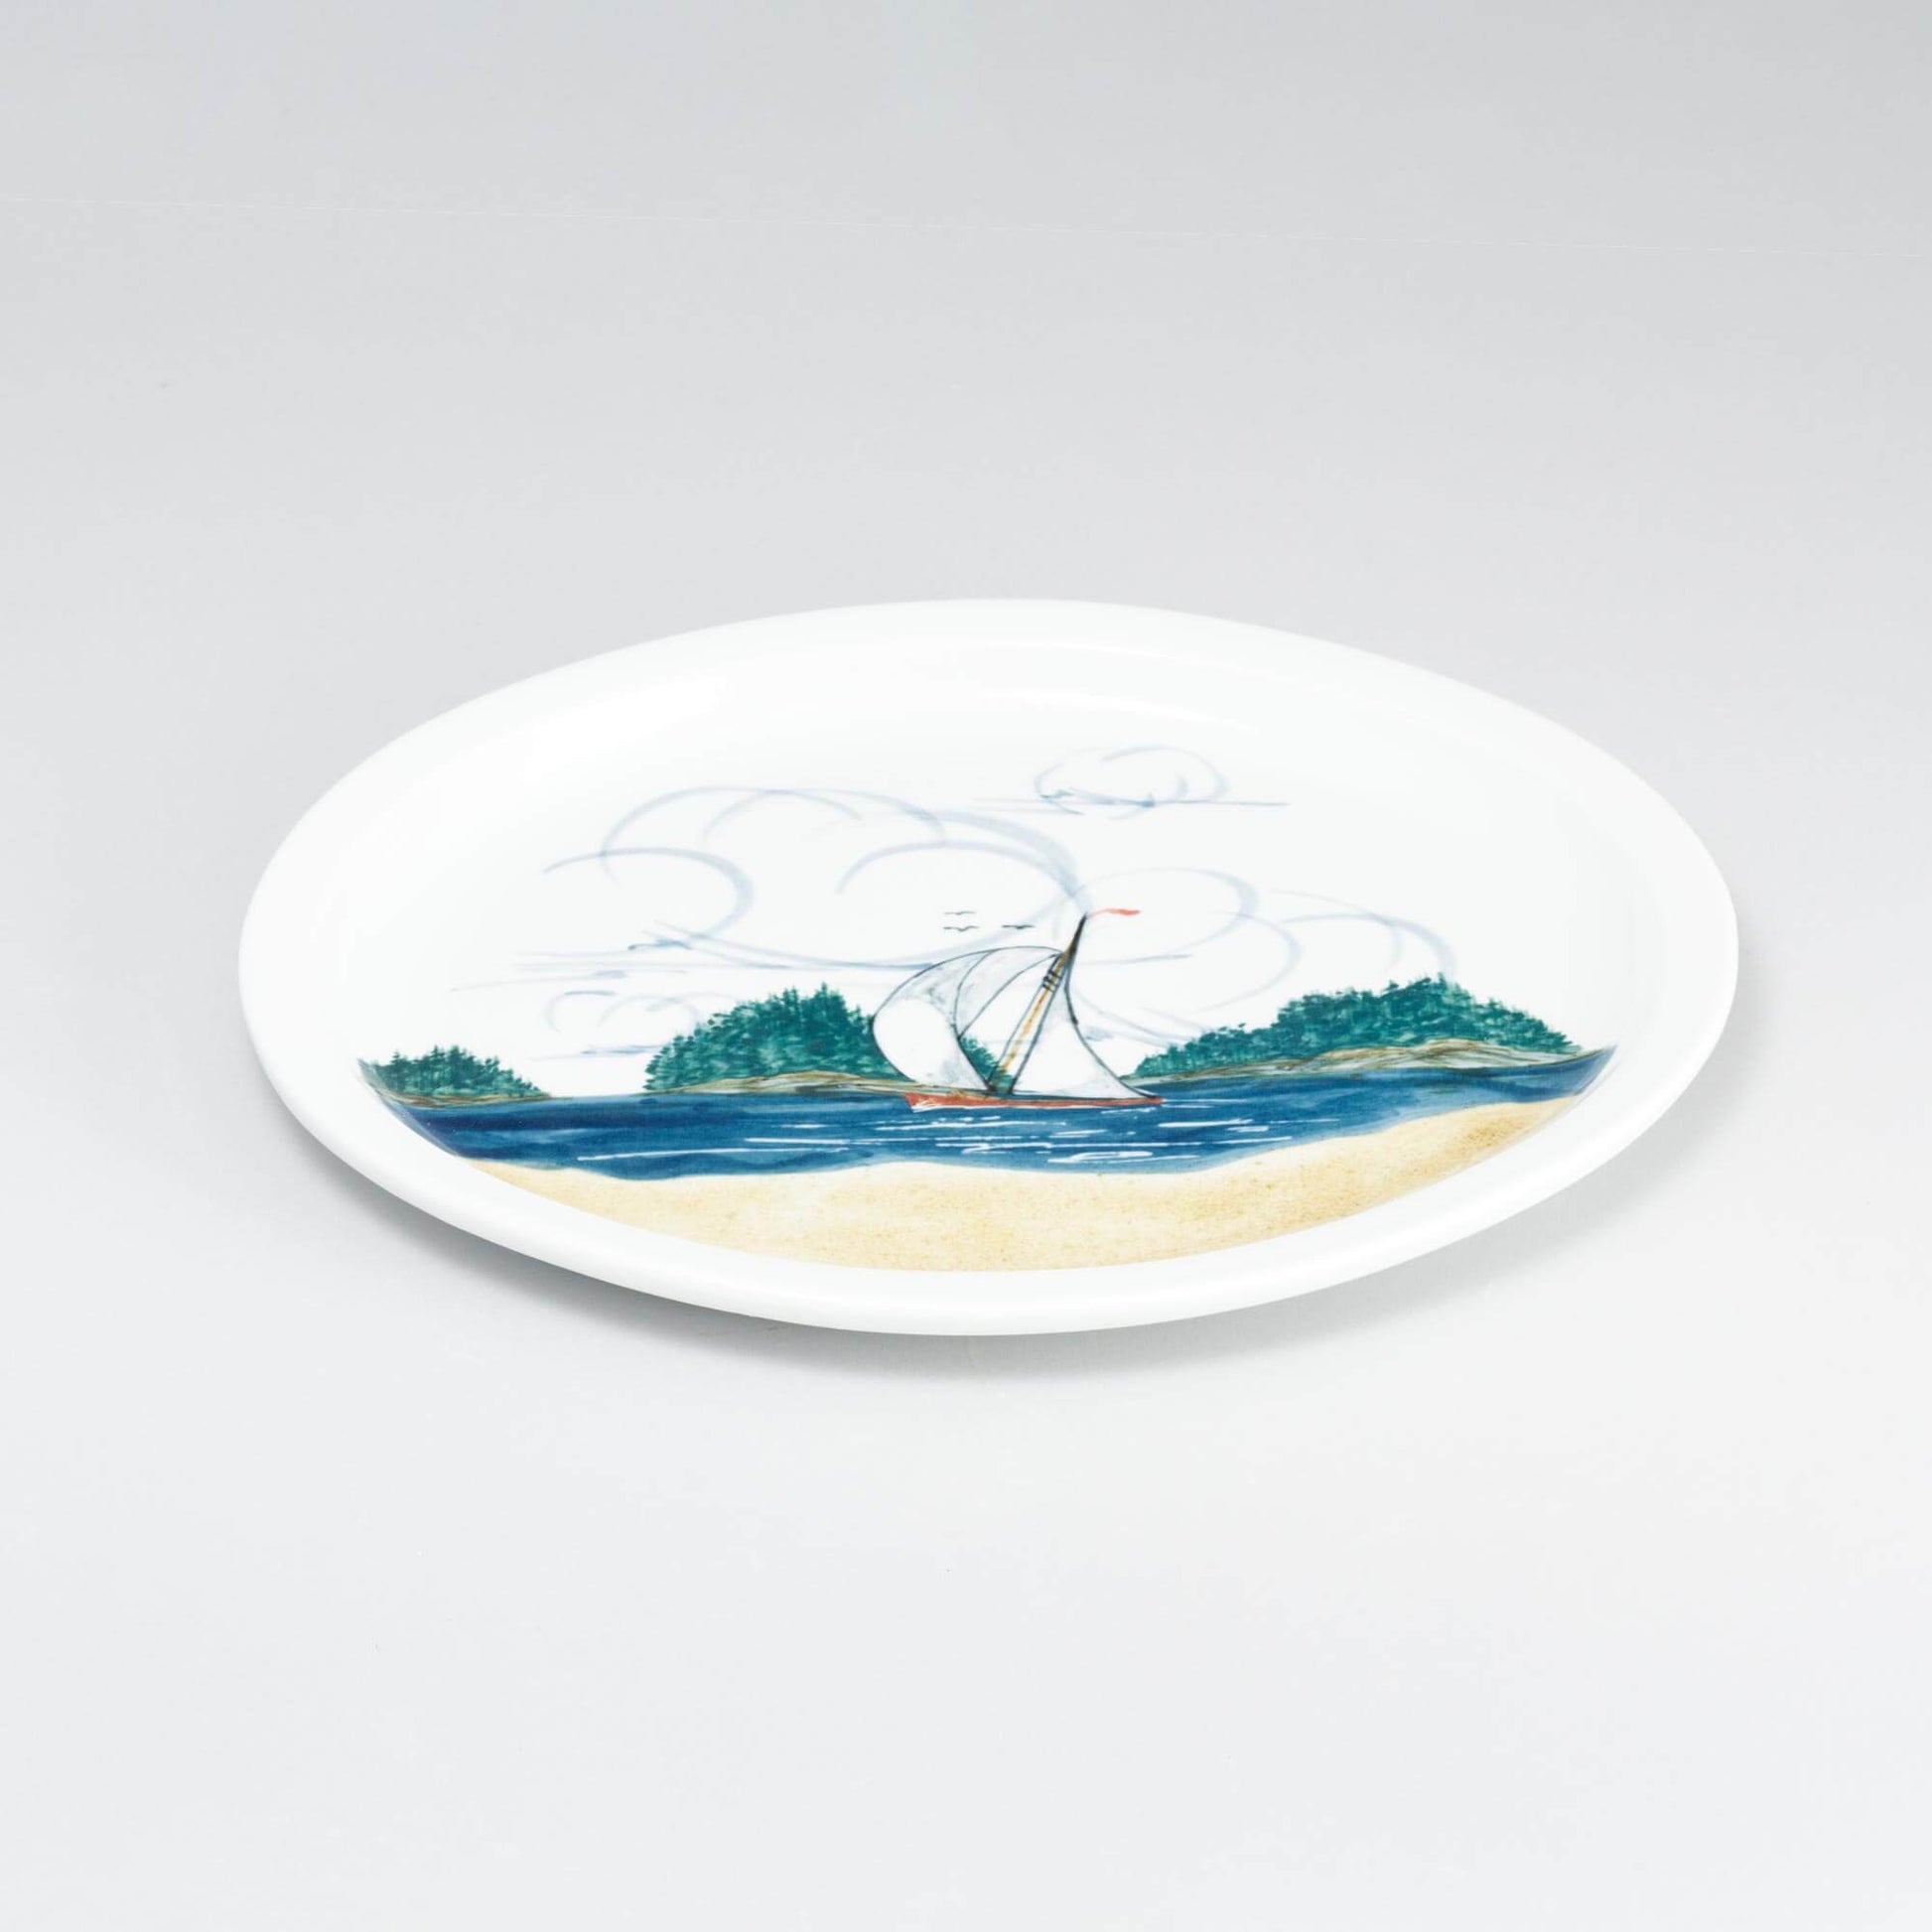 Handmade Pottery Oval Platter in Sailboat pattern made by Georgetown Pottery in Maine